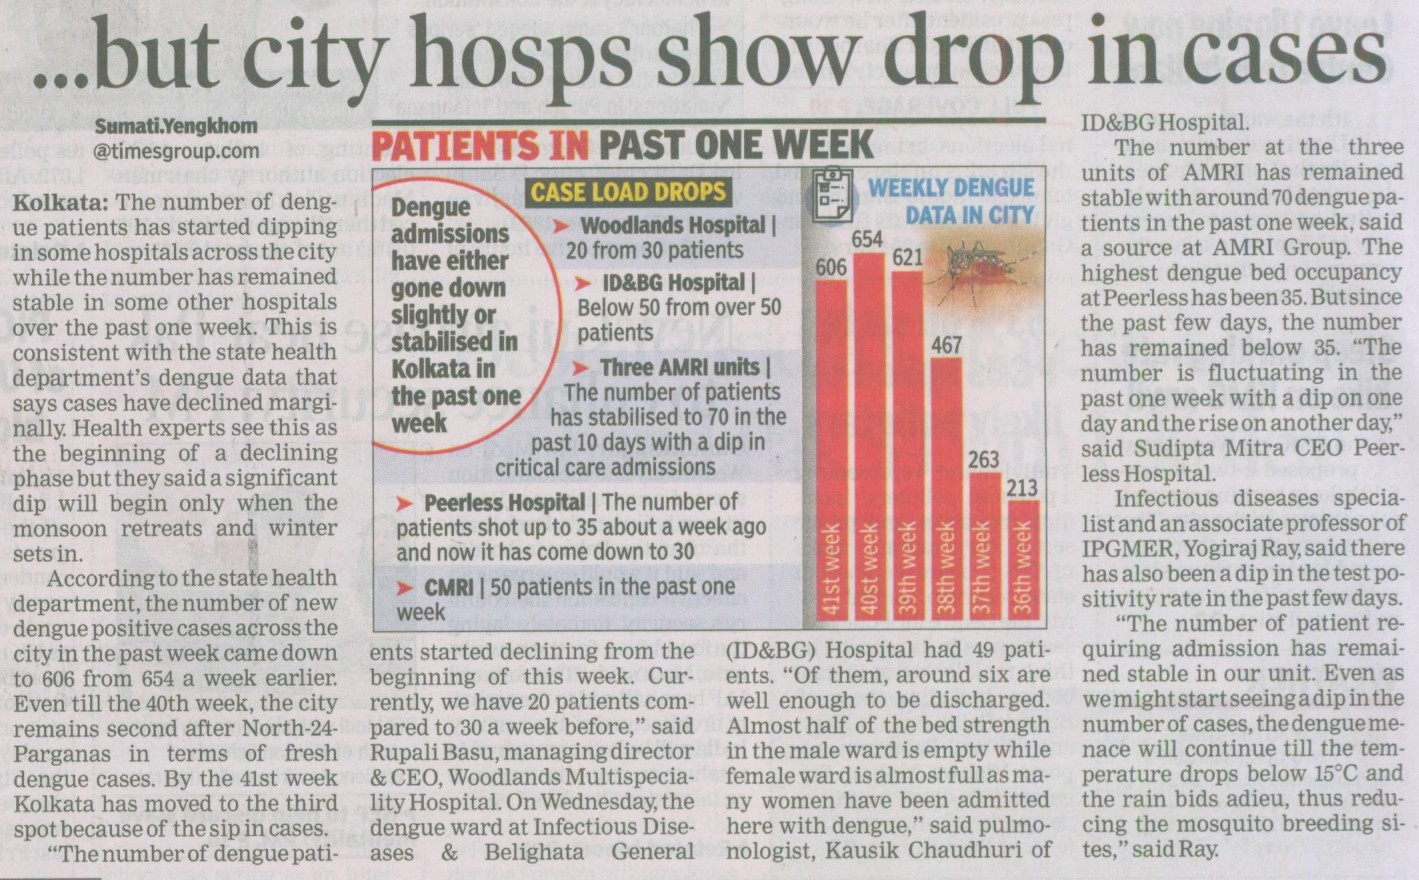 But city hospitals show drop in cases